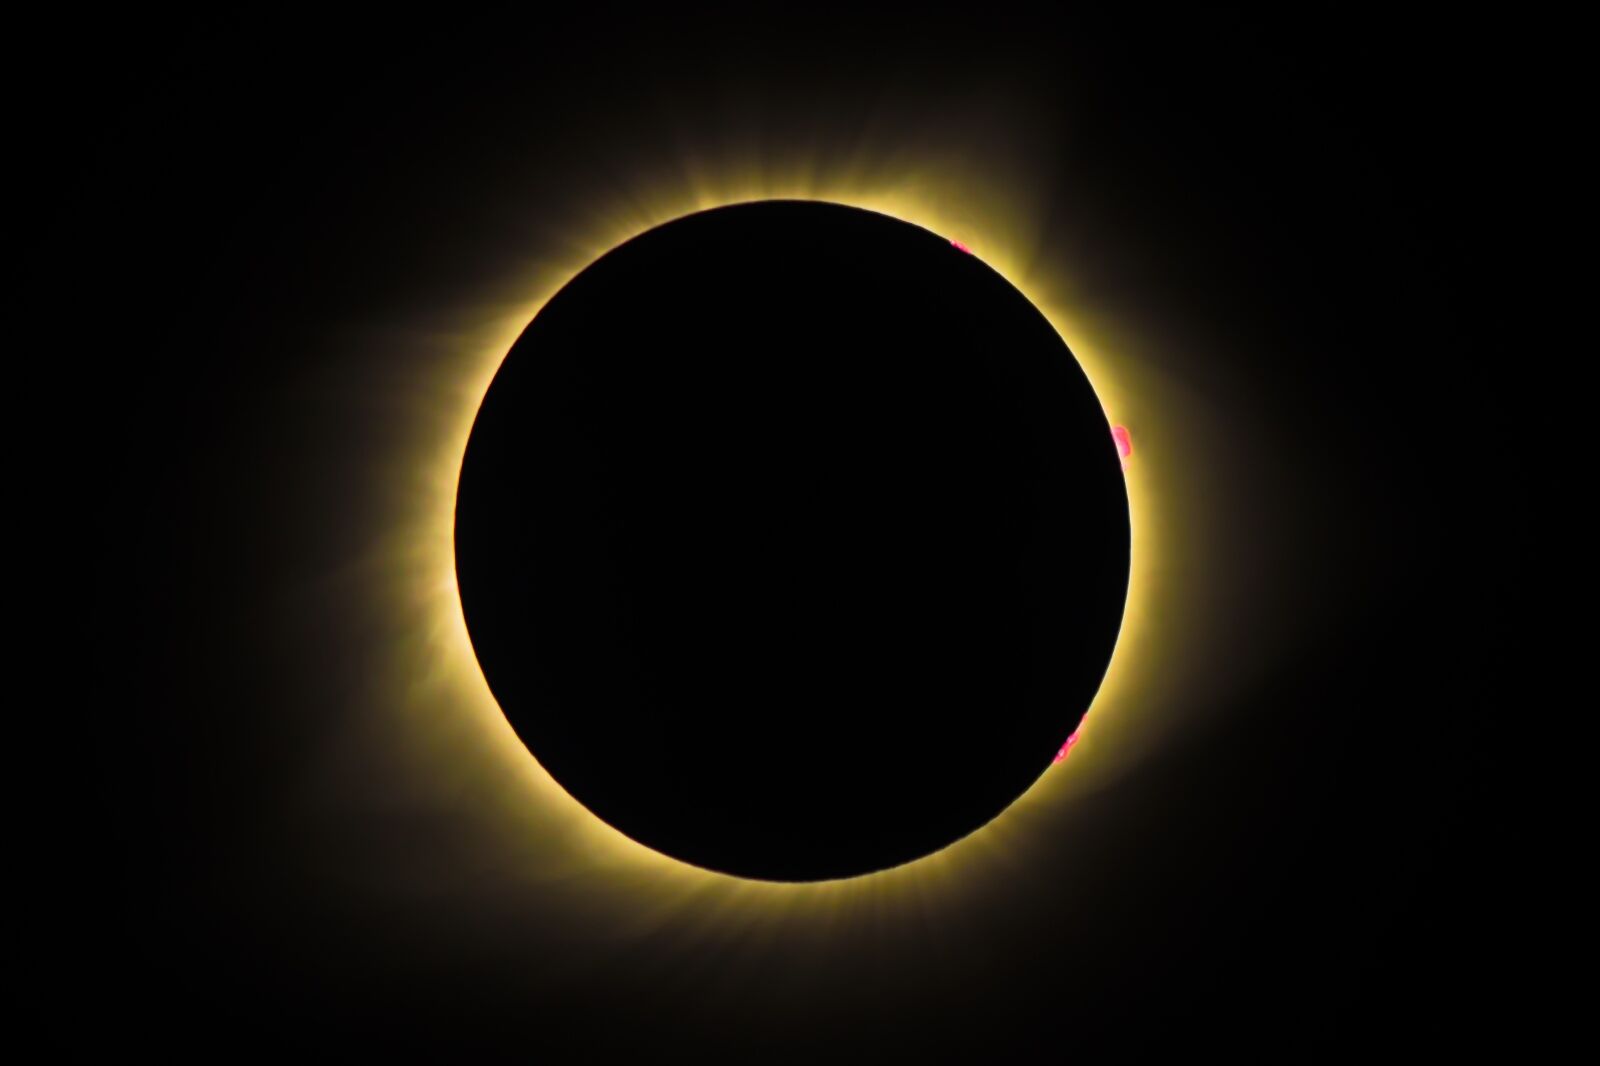 total solar eclipse viewed from mainland US